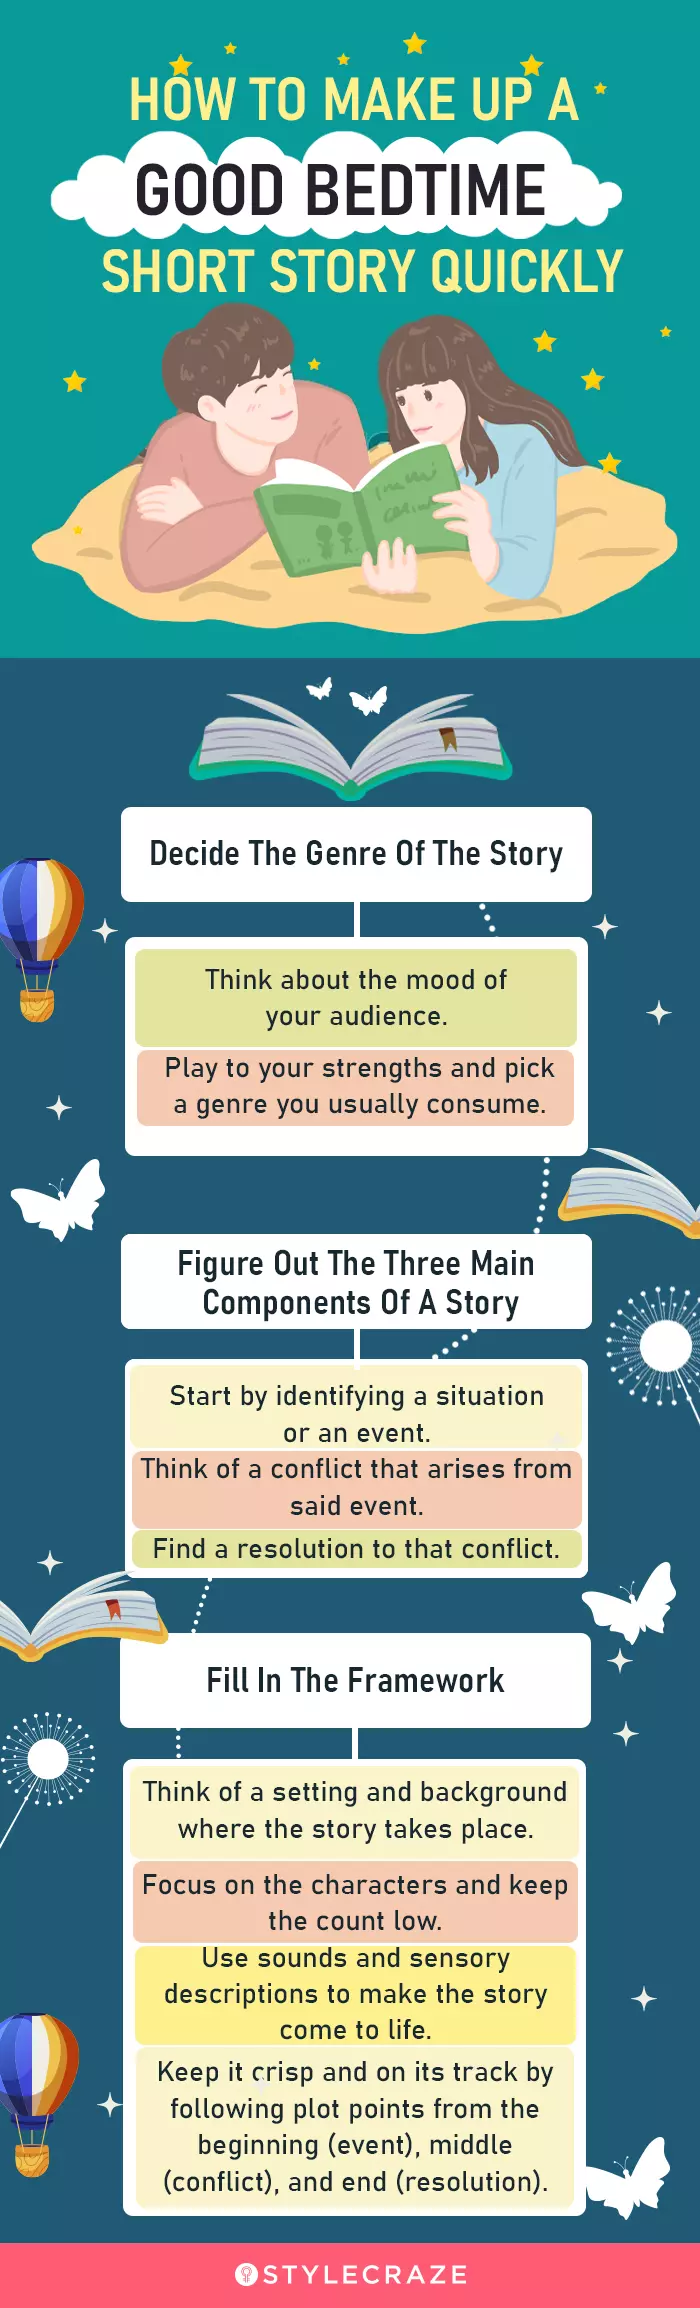 how to make up a good bedtime short story quickly (infographic)